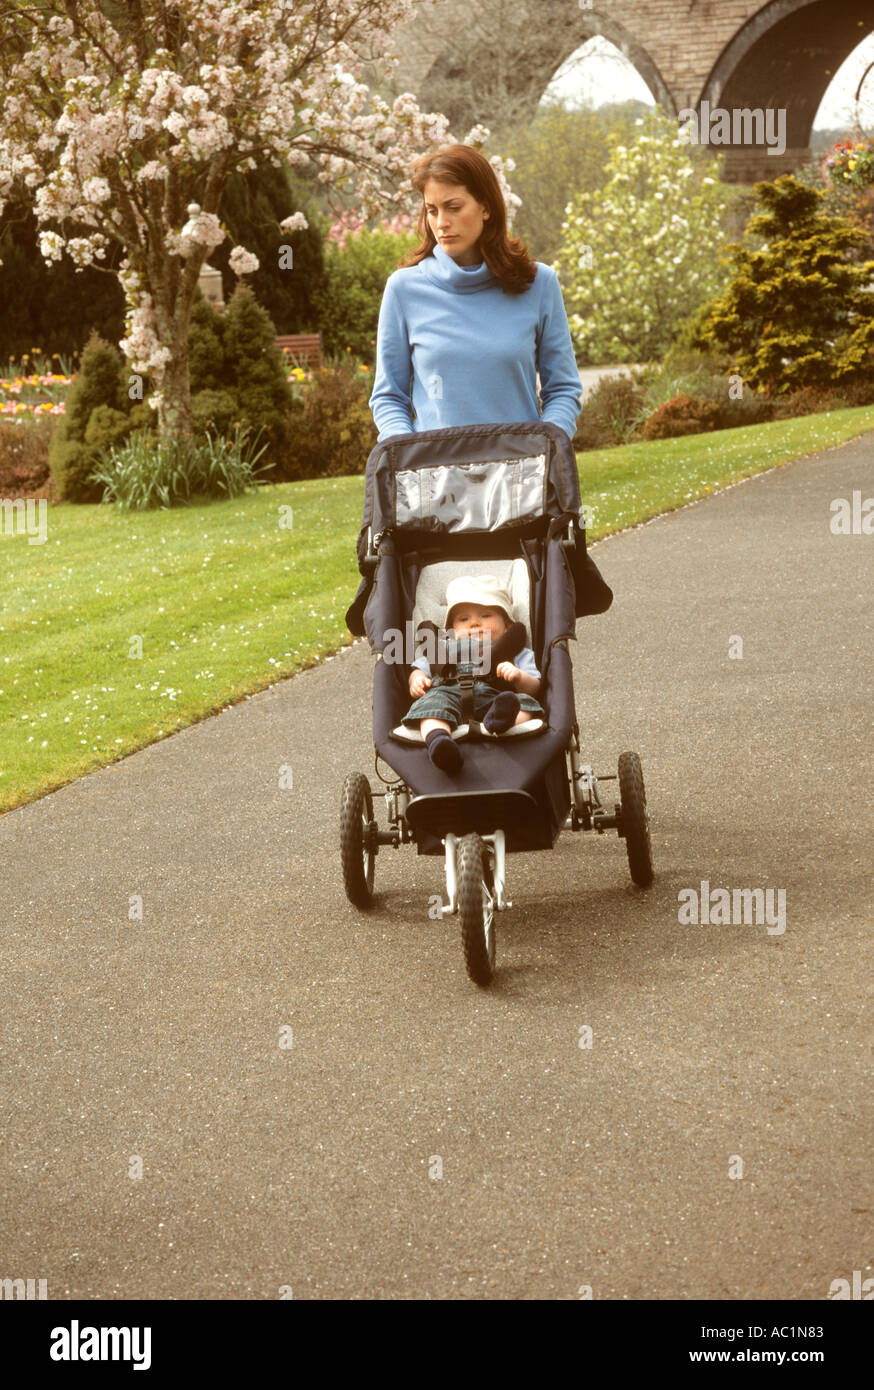 Mother pushing her baby son in a pram in a park looking depressed and unhappy Stock Photo